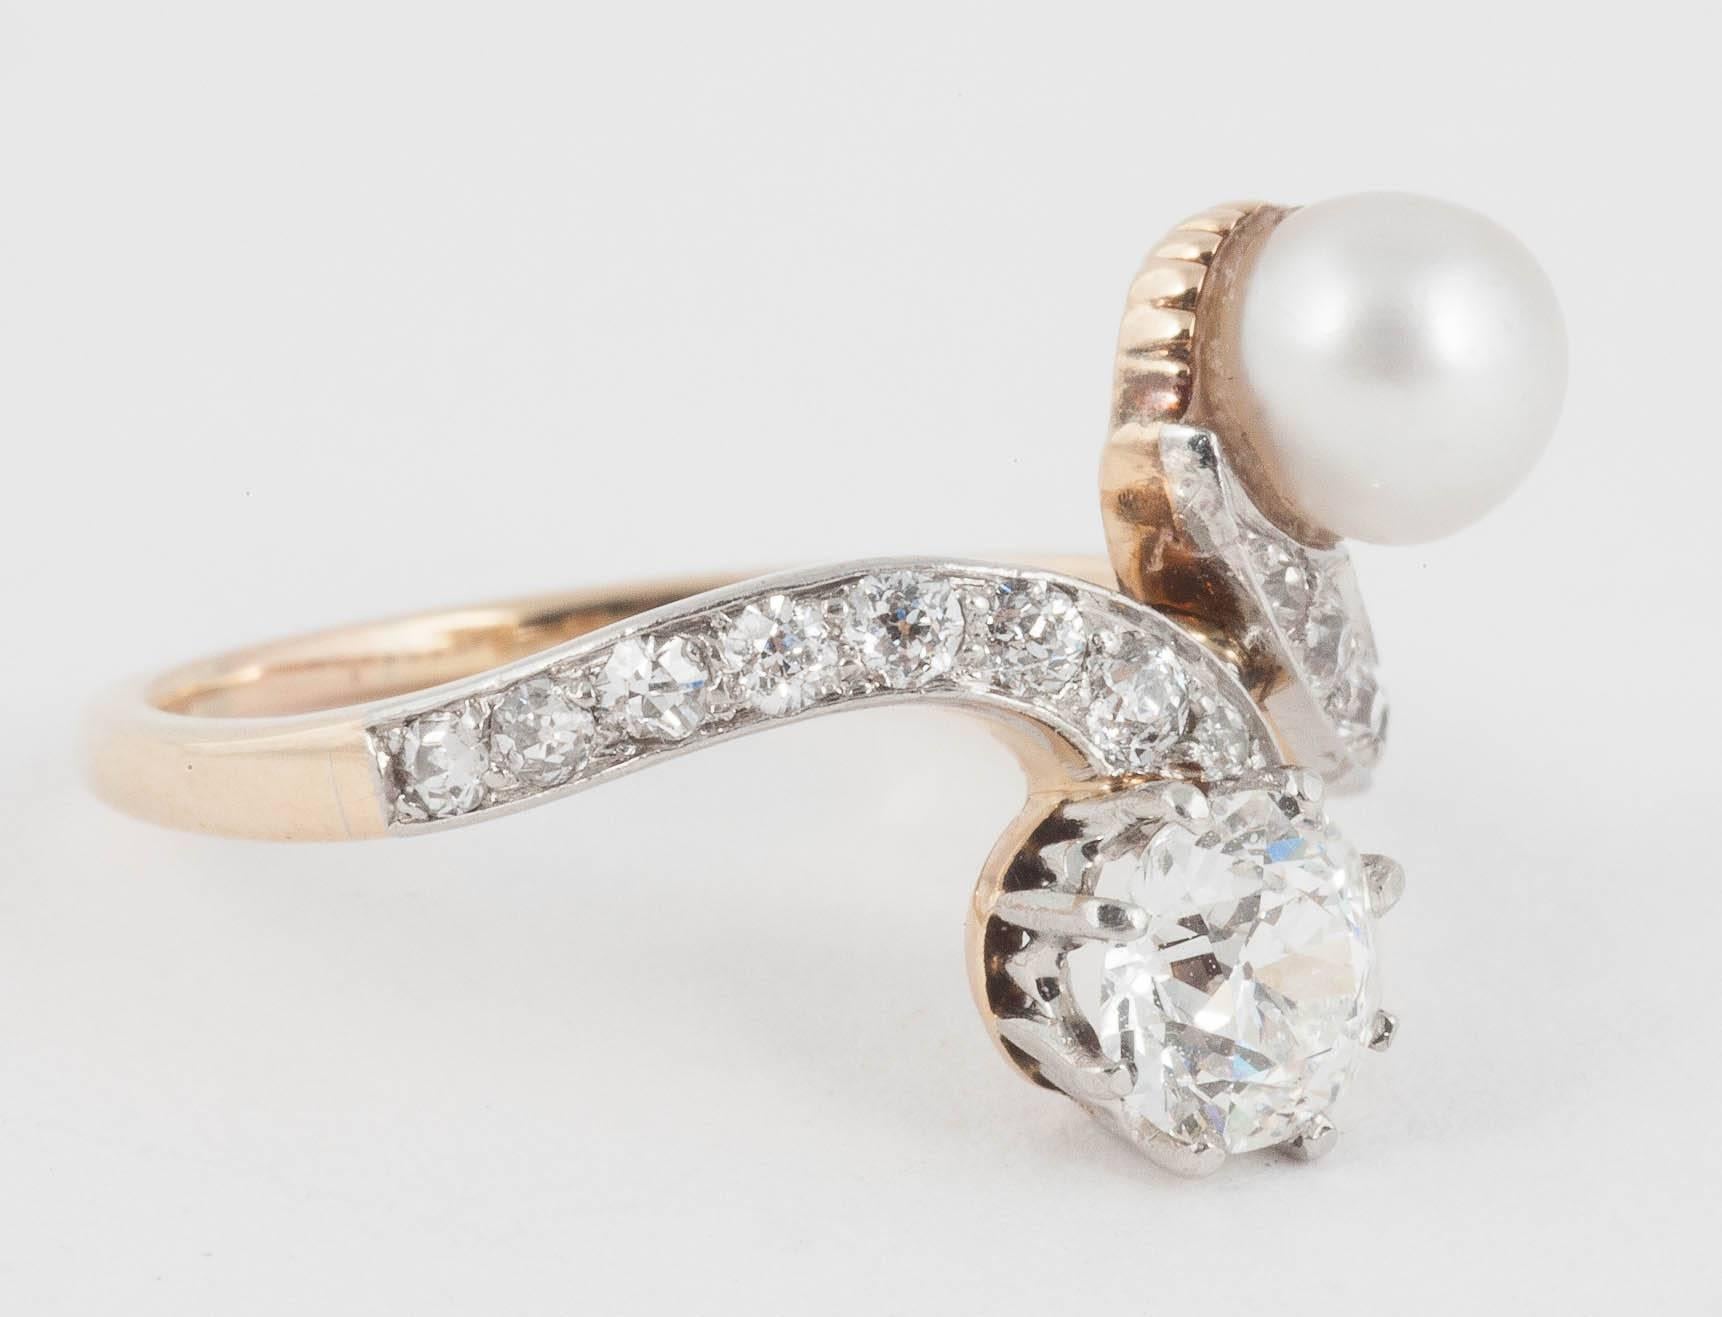 This Edwardian crossover ring has a 5.2 mm Pearl and .75 cts of Diamonds set in Platinum and 18ct Gold
Finger size L